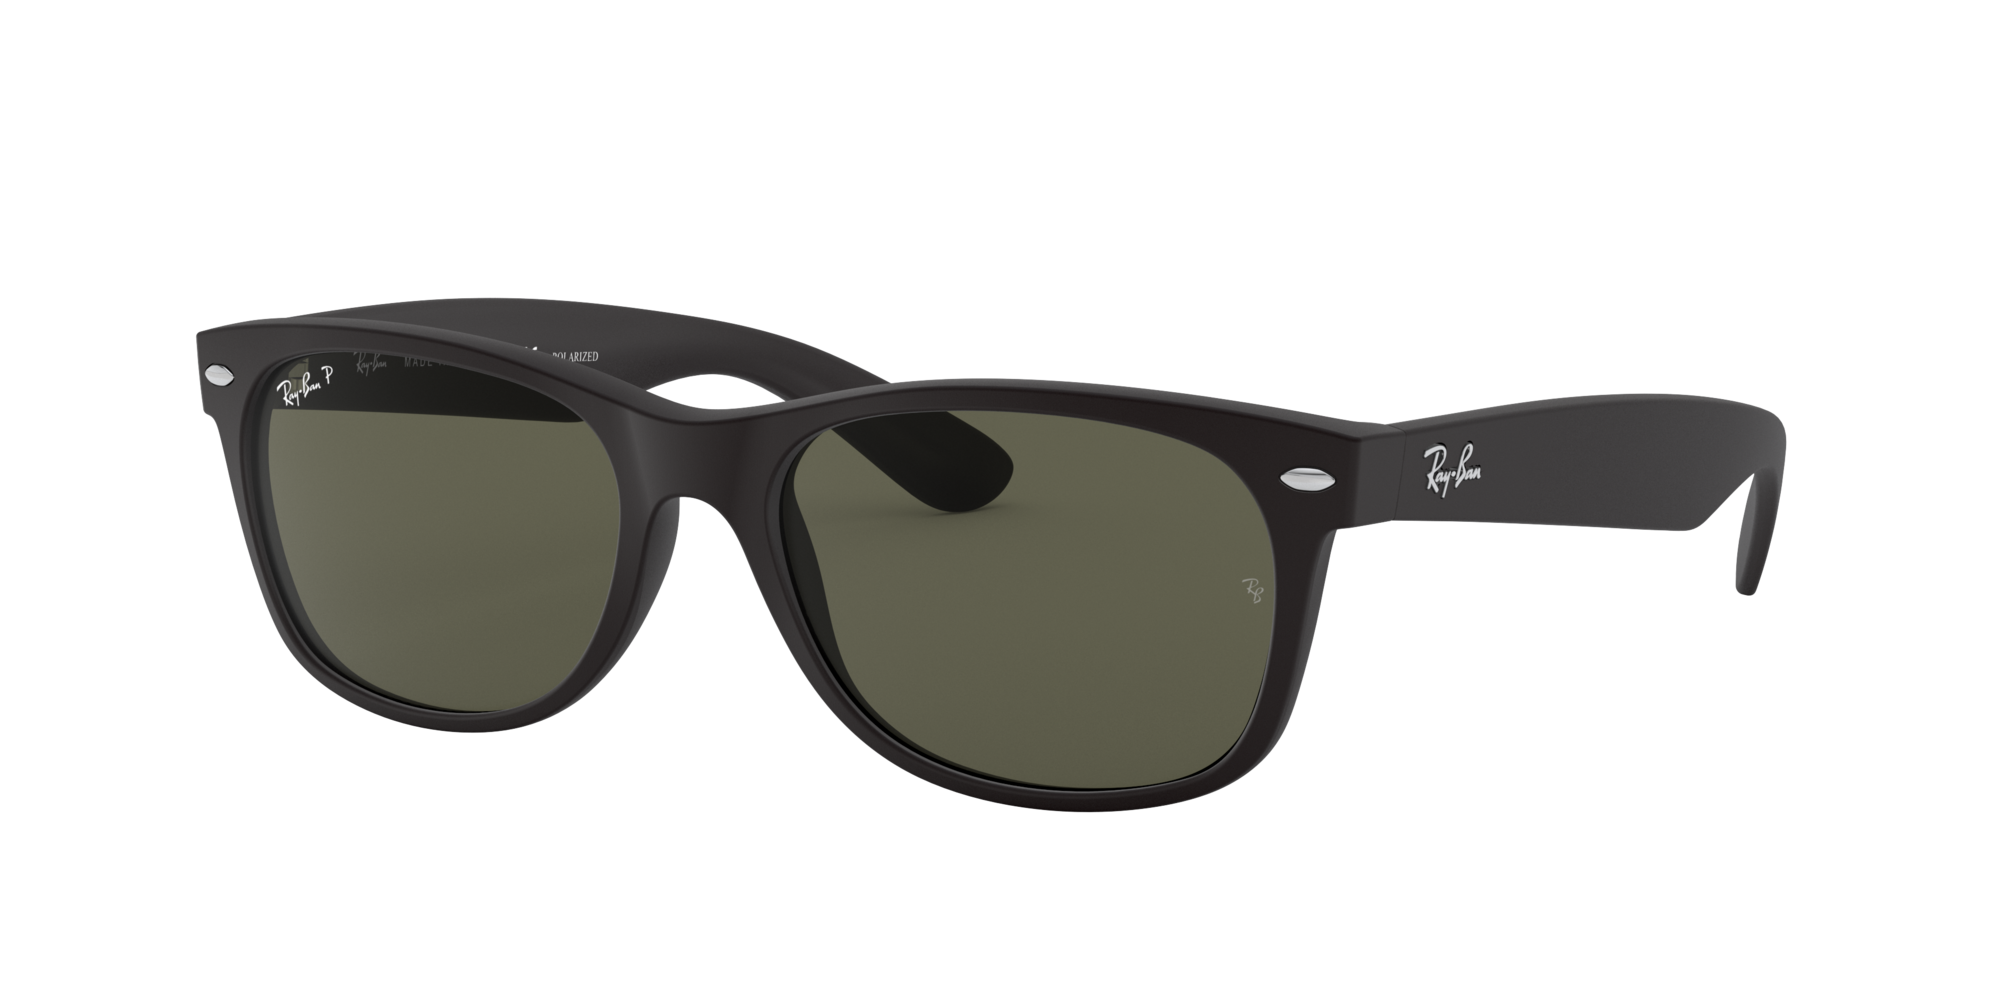 Ray-Ban 0RB2132 Sunglasses in Black 